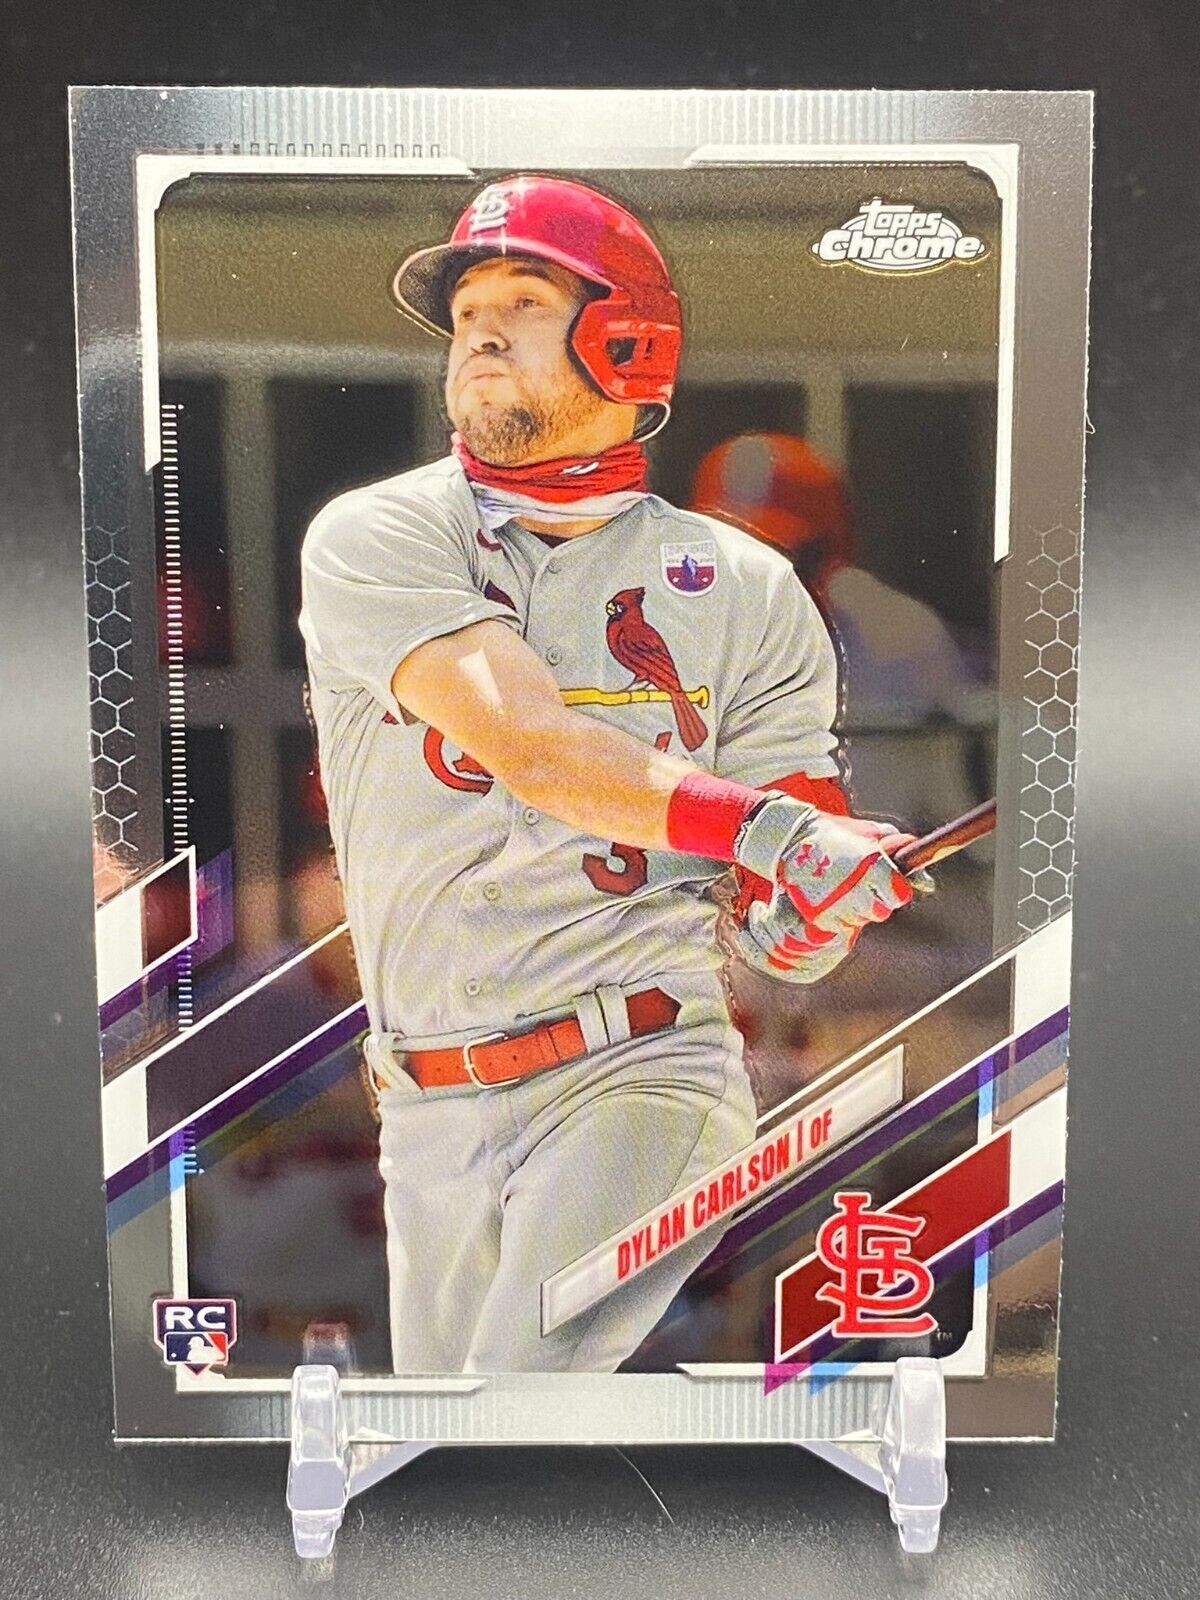 2021 Topps Chrome Dylan Carlson #140 Rookie RC St. Louis Cardinals